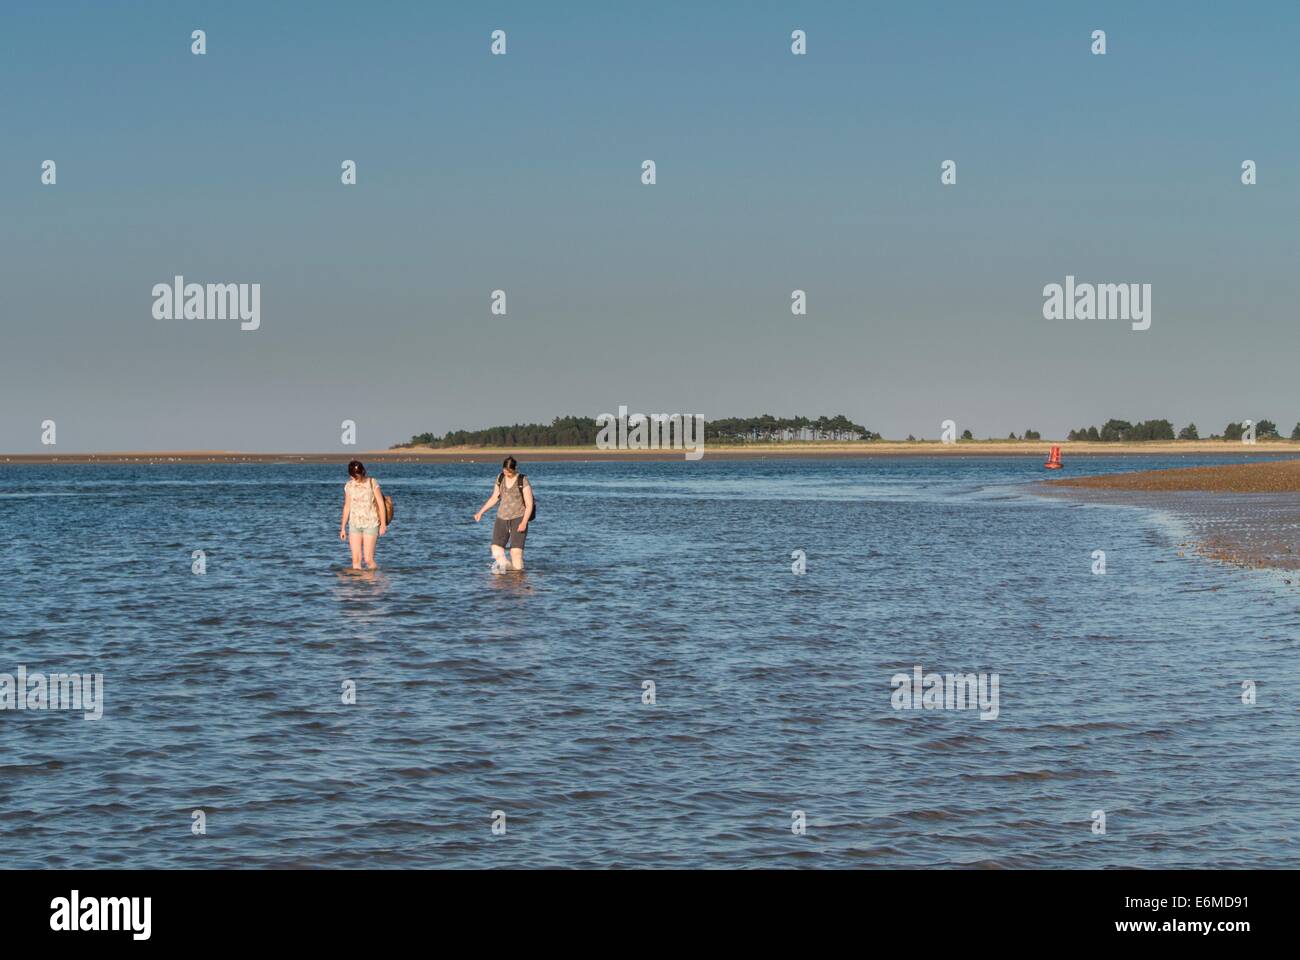 Stretch of beach with people paddling, Wells-next-the-sea, Norfolk, England. Stock Photo